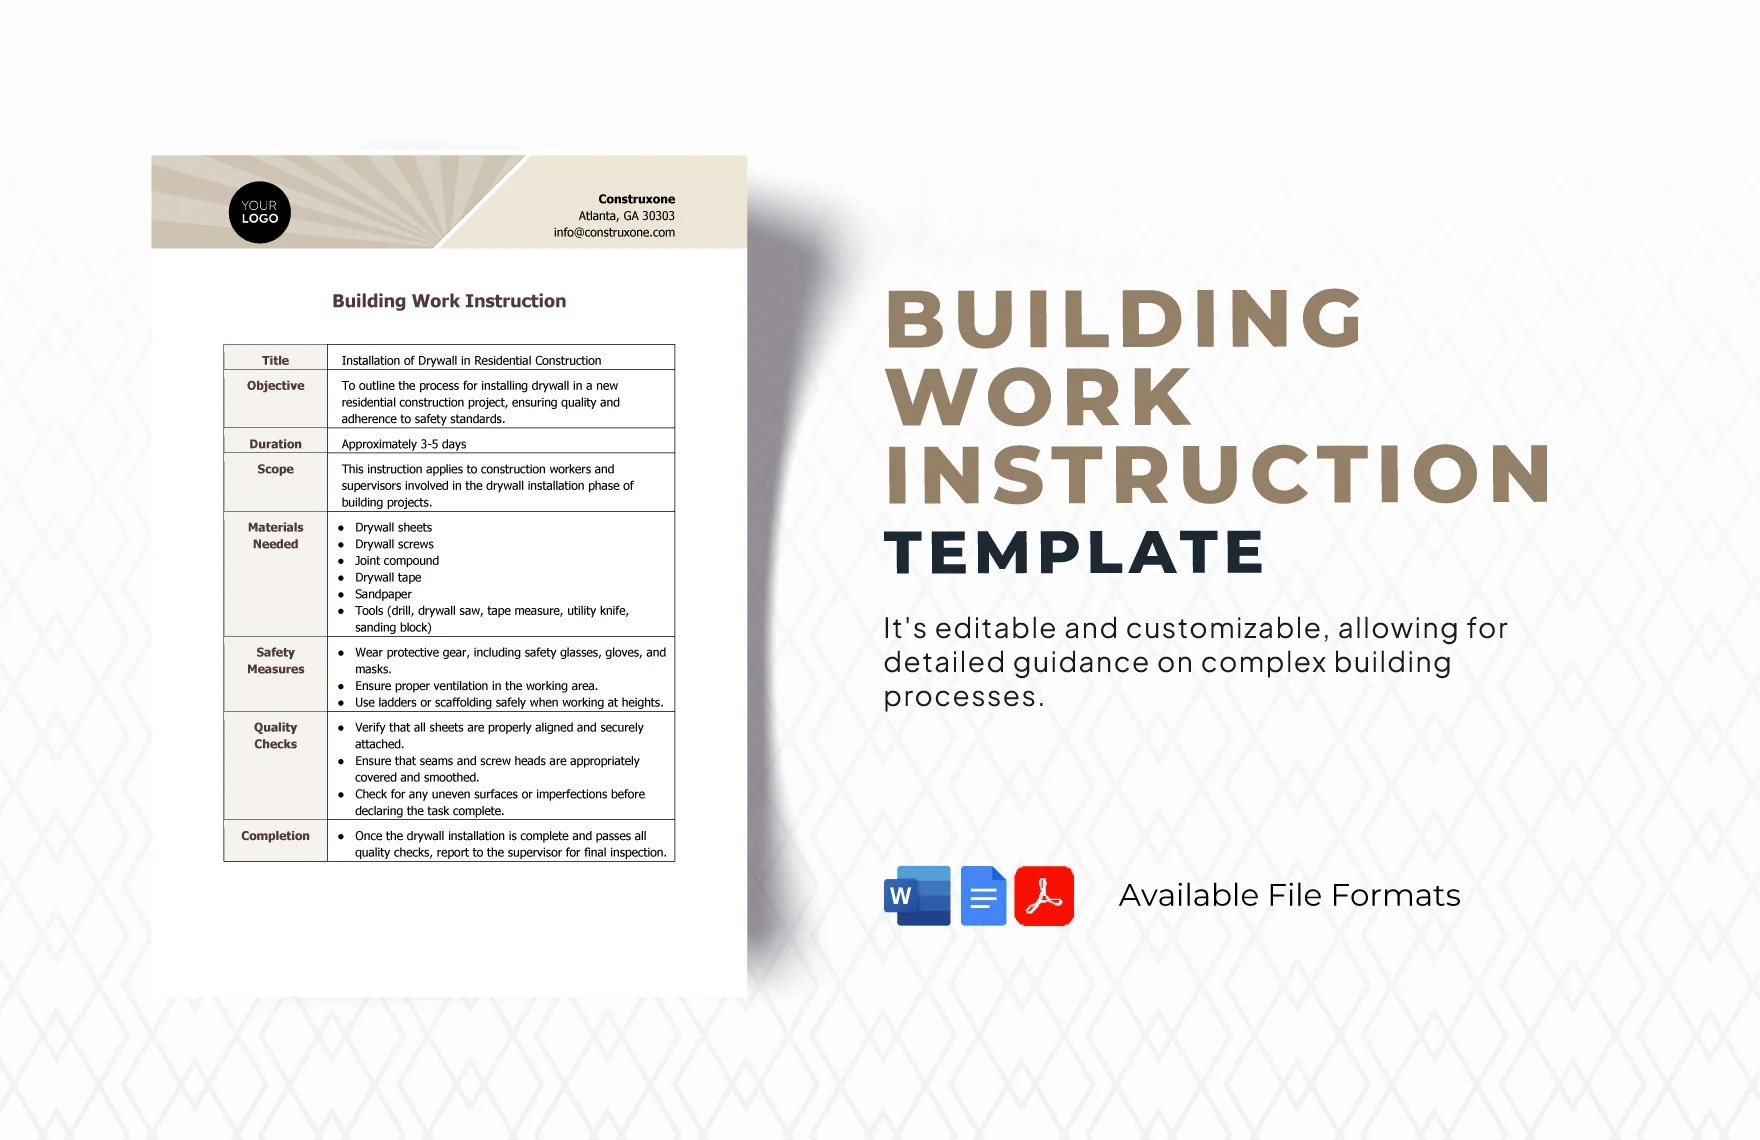 Building Work Instruction Template